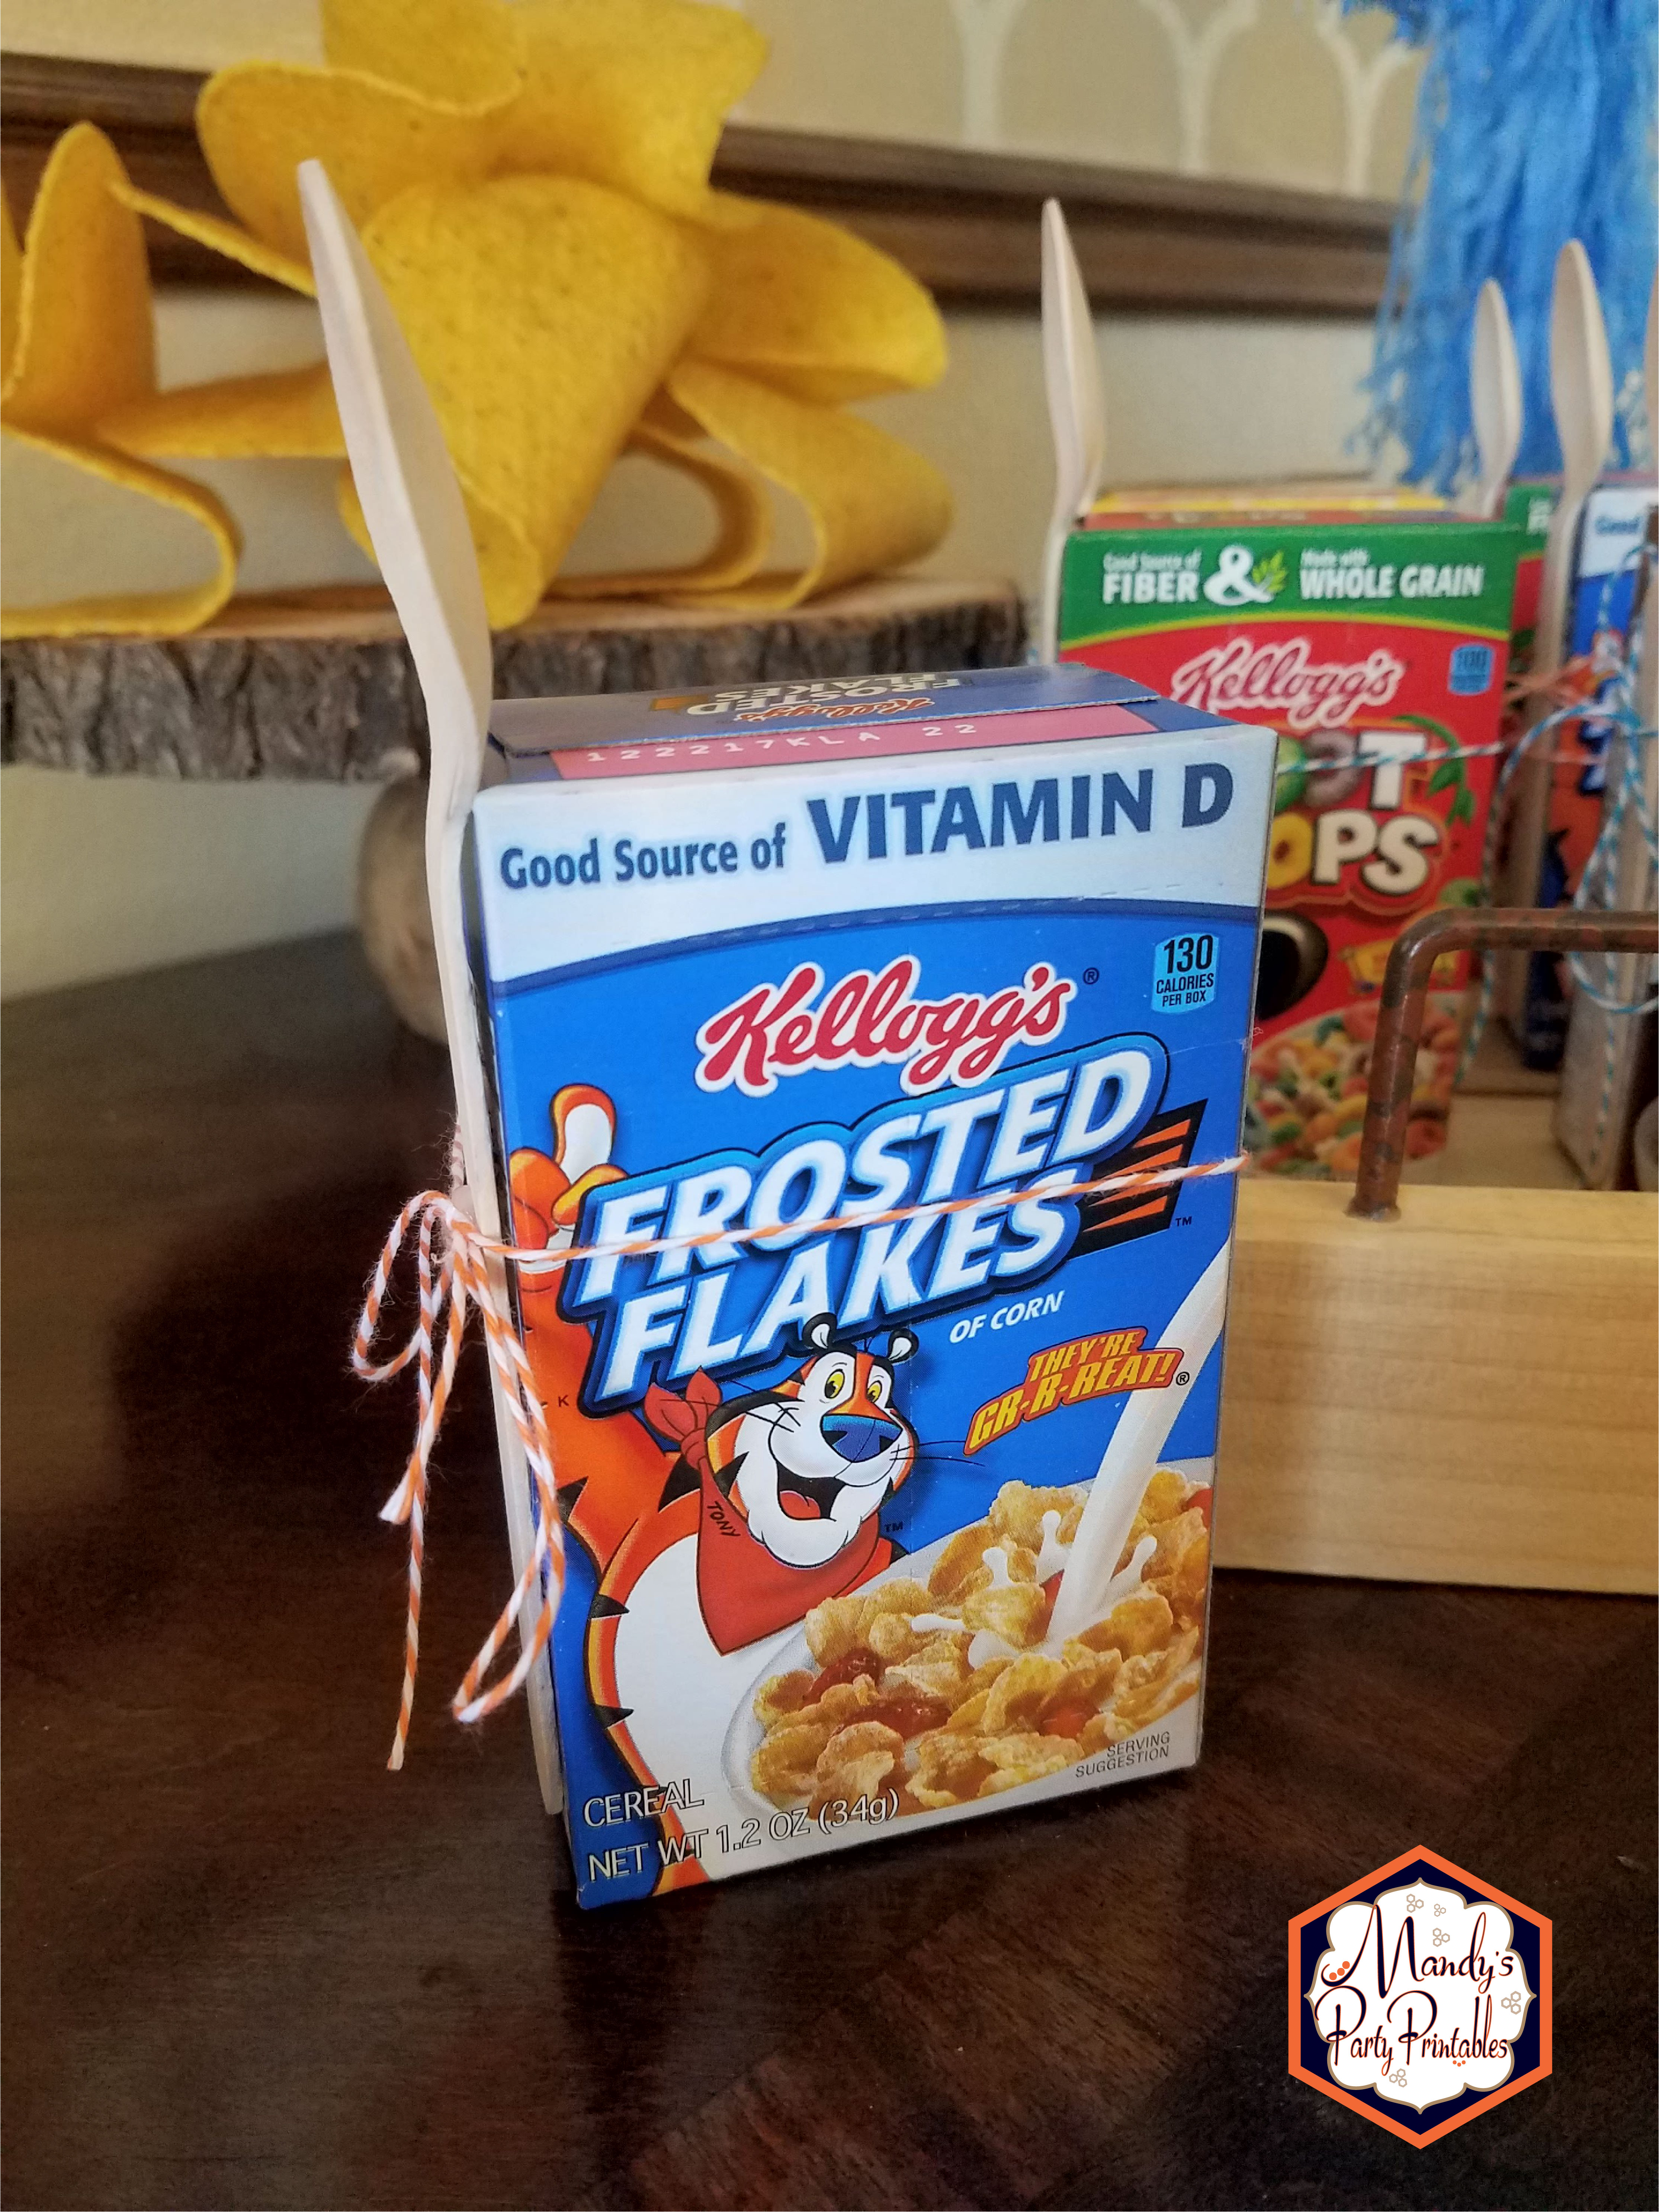 Frosted Flakes cereal box from Good Mythical Morning Inspired Birthday Party via Mandy's Party Printables